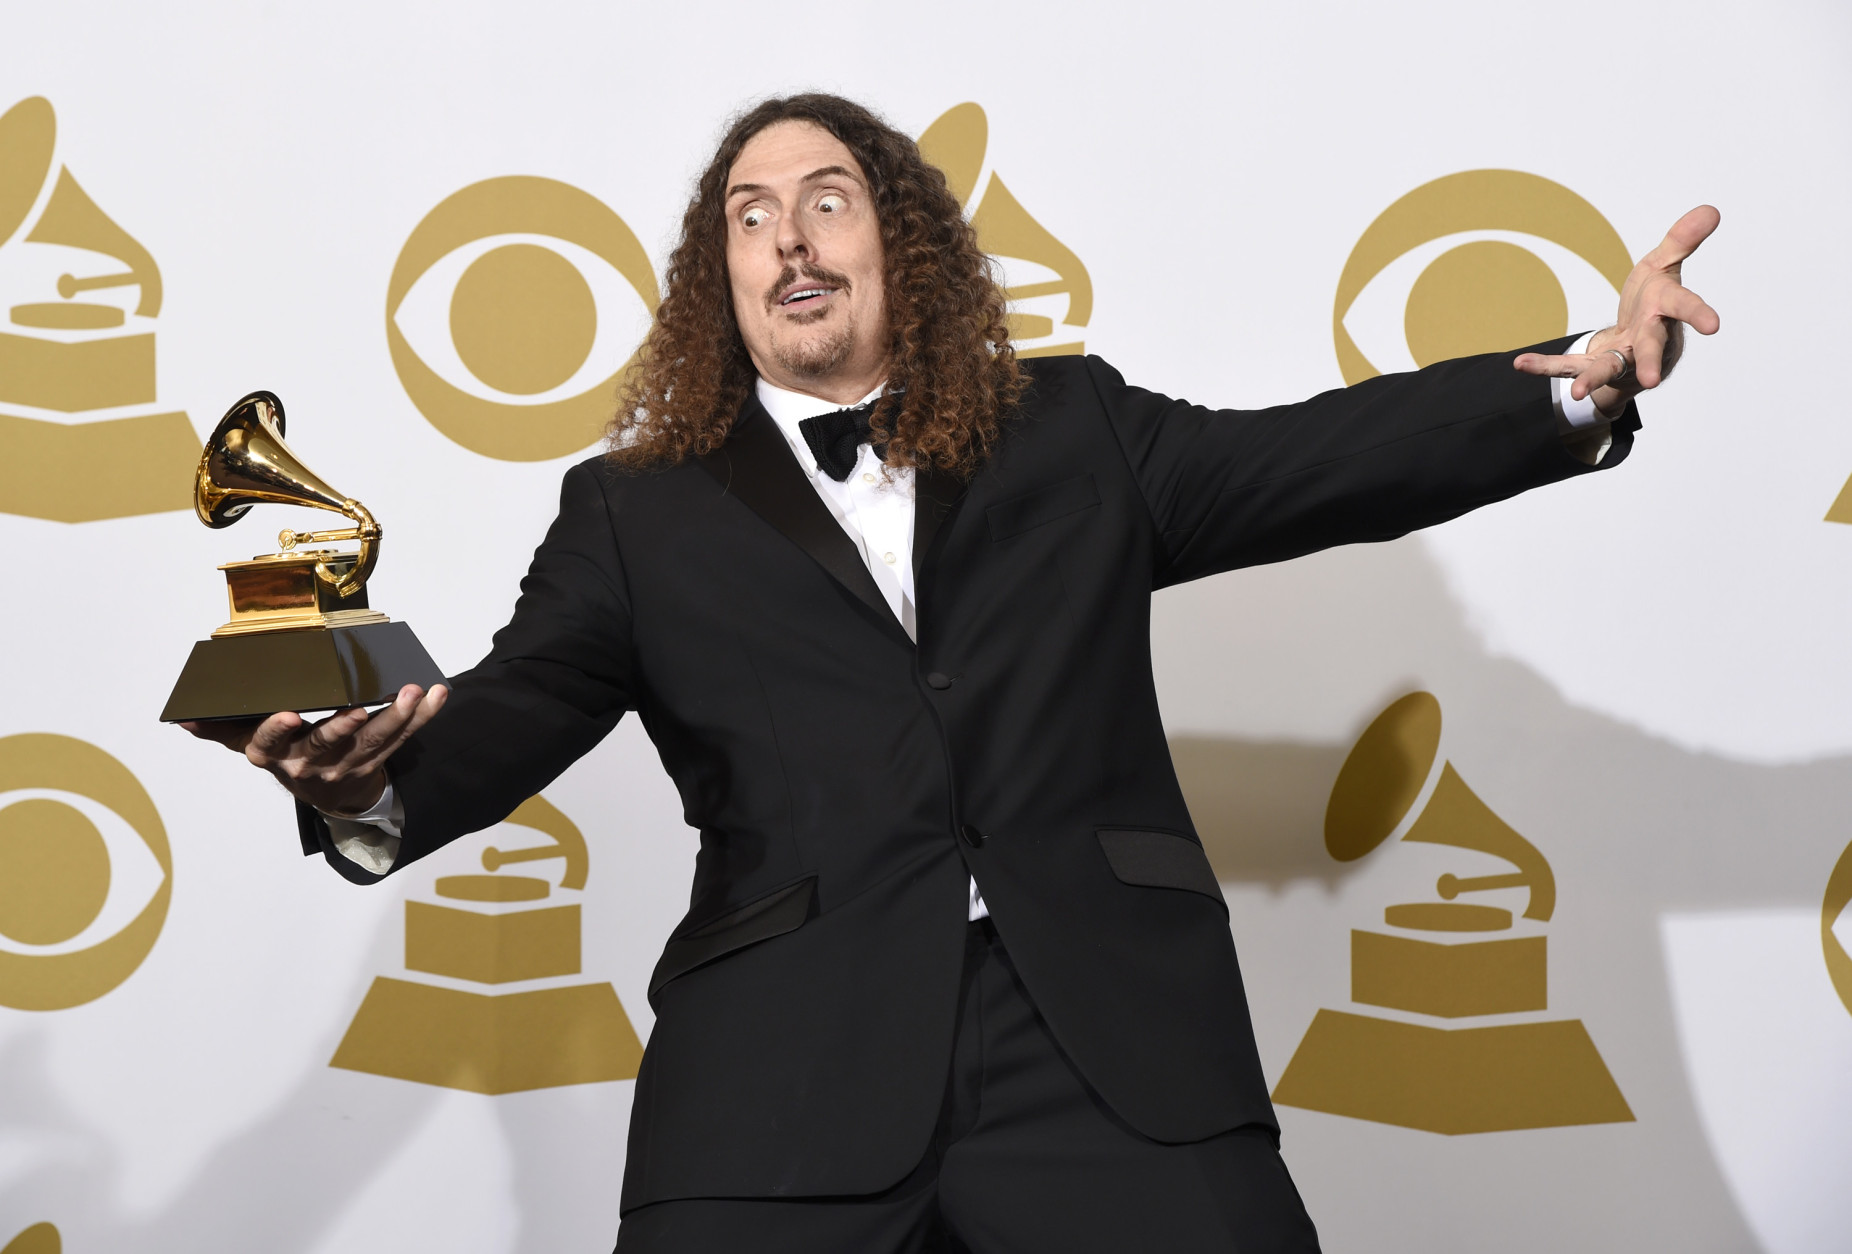 "Weird Al" Yankovic poses in the press room with the award for best comedy album for "Mandatory Fun" at the 57th annual Grammy Awards at the Staples Center on Sunday, Feb. 8, 2015, in Los Angeles. (Photo by Chris Pizzello/Invision/AP)